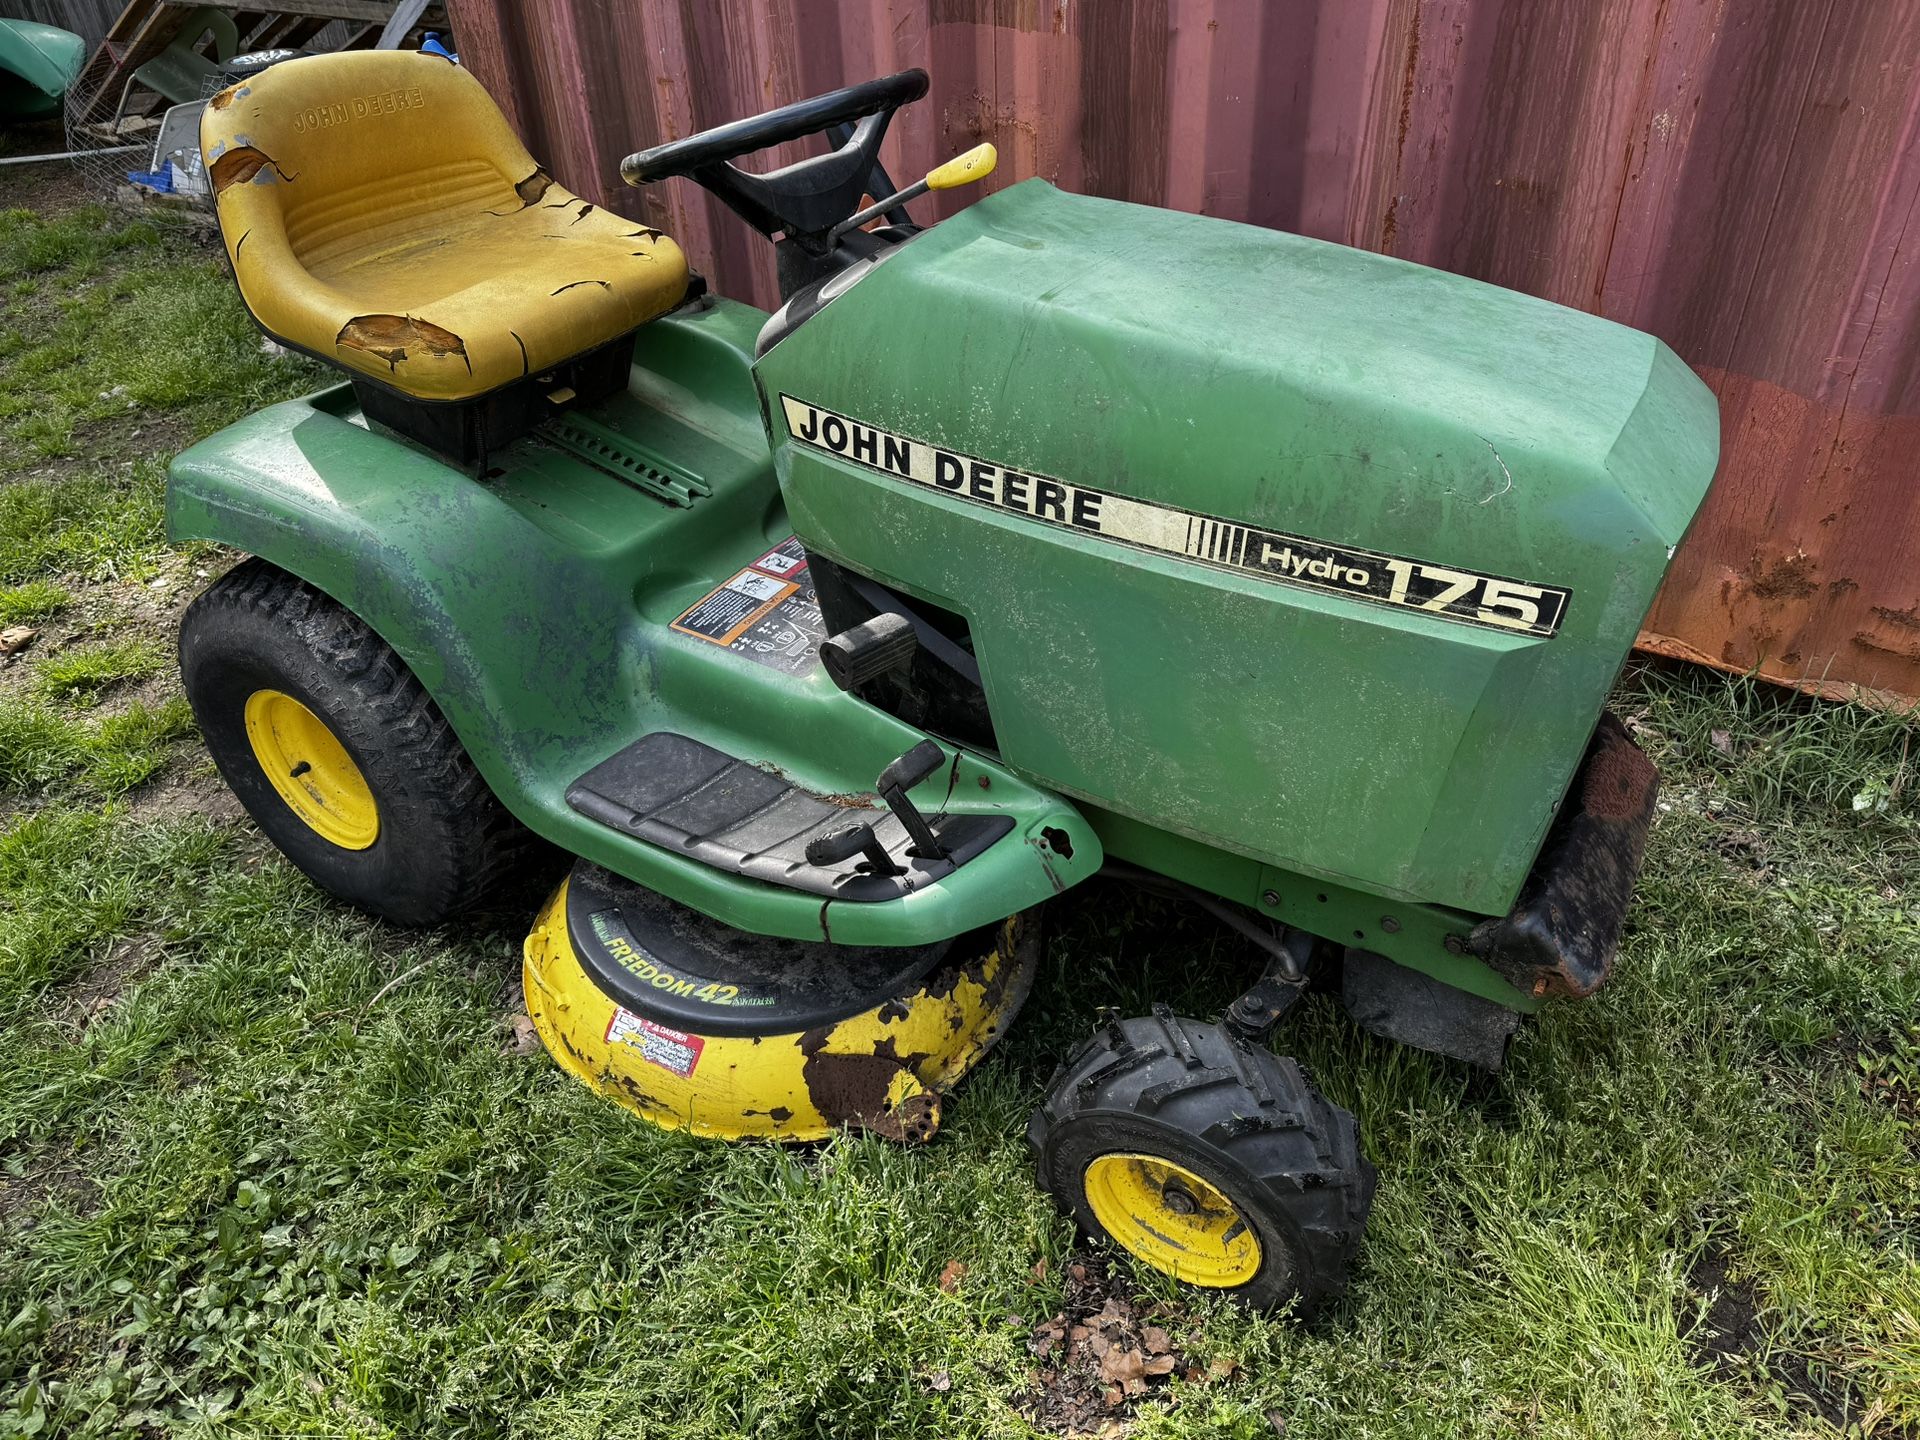 John Deere Hydro 175 Riding Lawnmower (Free Delivery Within 20 Miles)